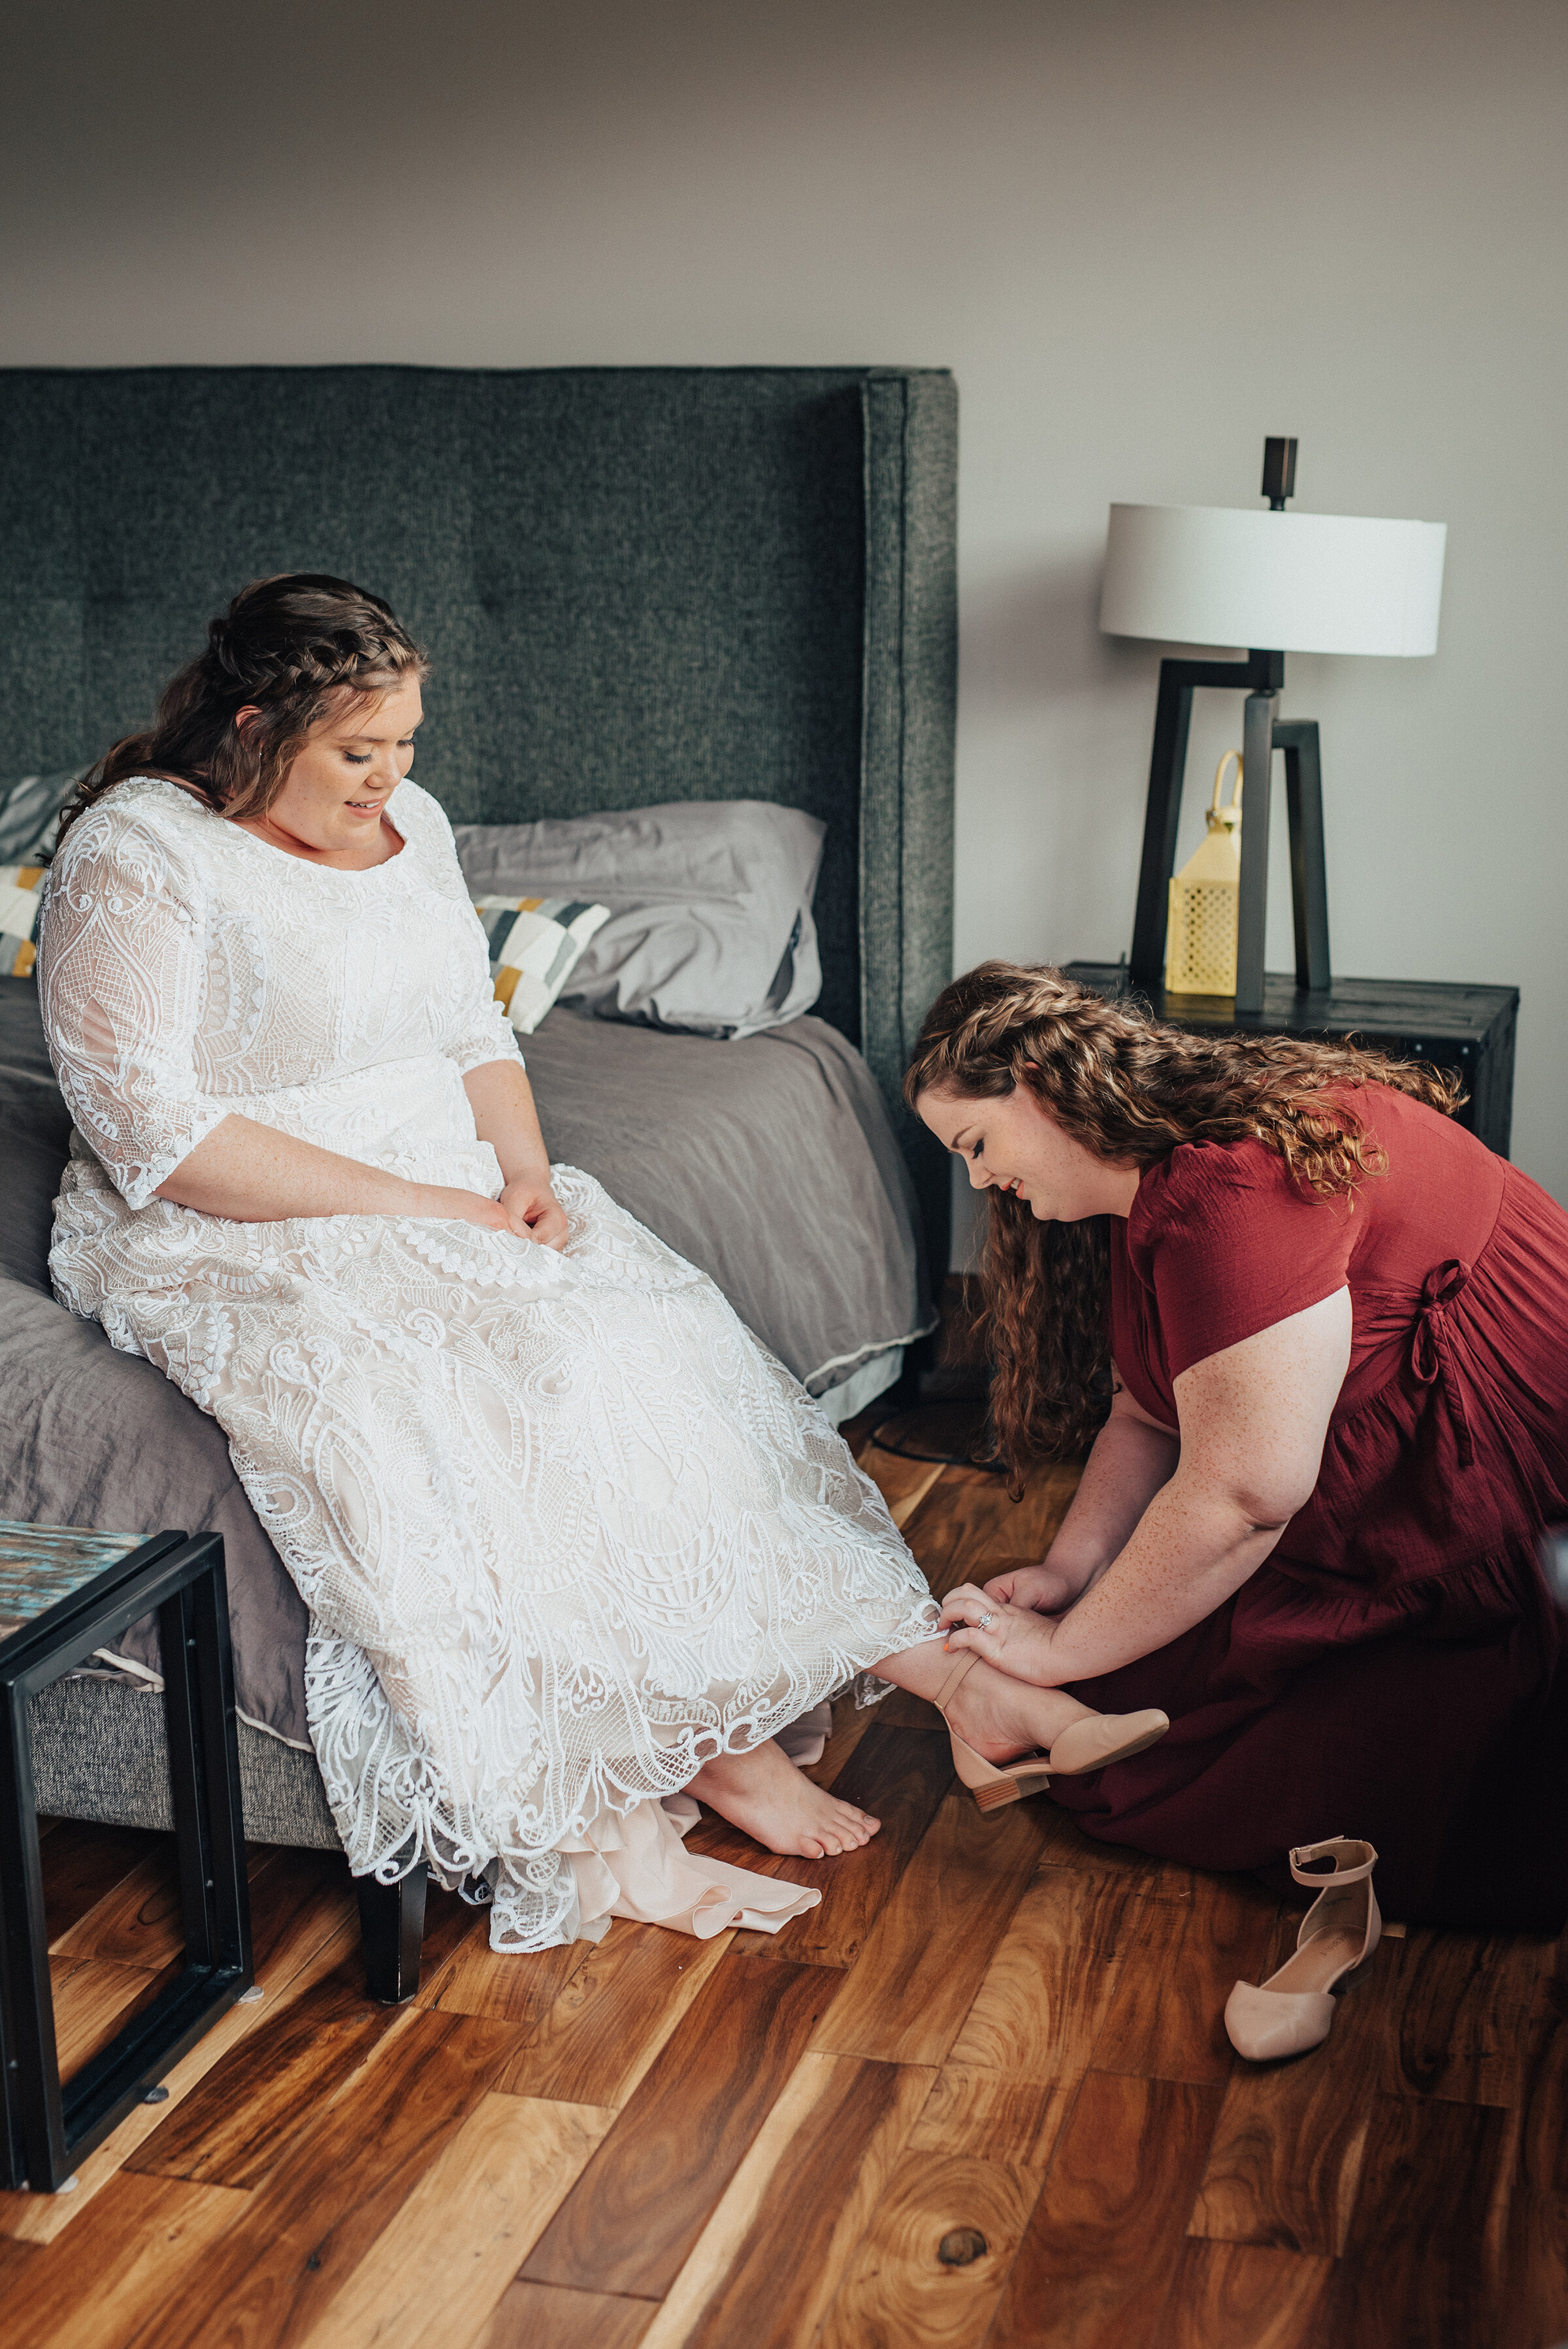  Getting ready for the big day with the help of bridesmaids in northern Utah shot by Kristi Alyse Photography. Bridesmaids maid of honor getting ready bridal shoe maroon red bridesmaid dress wedding dress tan flat shoes logan Utah big day inspiration meaningful moments captured Kristi Alyse photography #weddinginspo #loganutah #brideandgroom #utahbride #utahweddingphotographer #meaningfulmoment #weddingphotography #northernutahwedding #weddinghairstyles #weddingday #bridals 